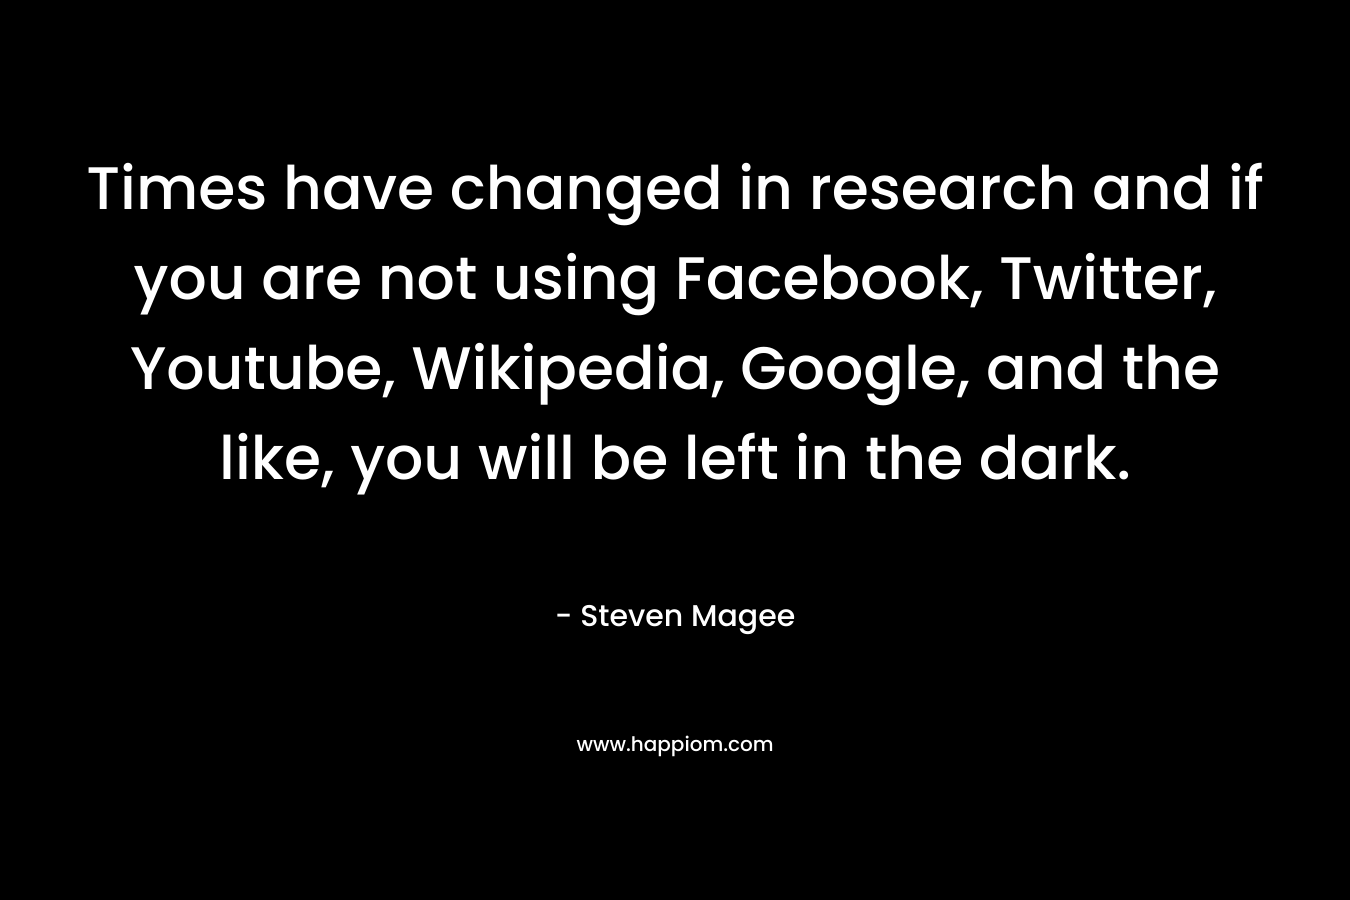 Times have changed in research and if you are not using Facebook, Twitter, Youtube, Wikipedia, Google, and the like, you will be left in the dark. – Steven Magee